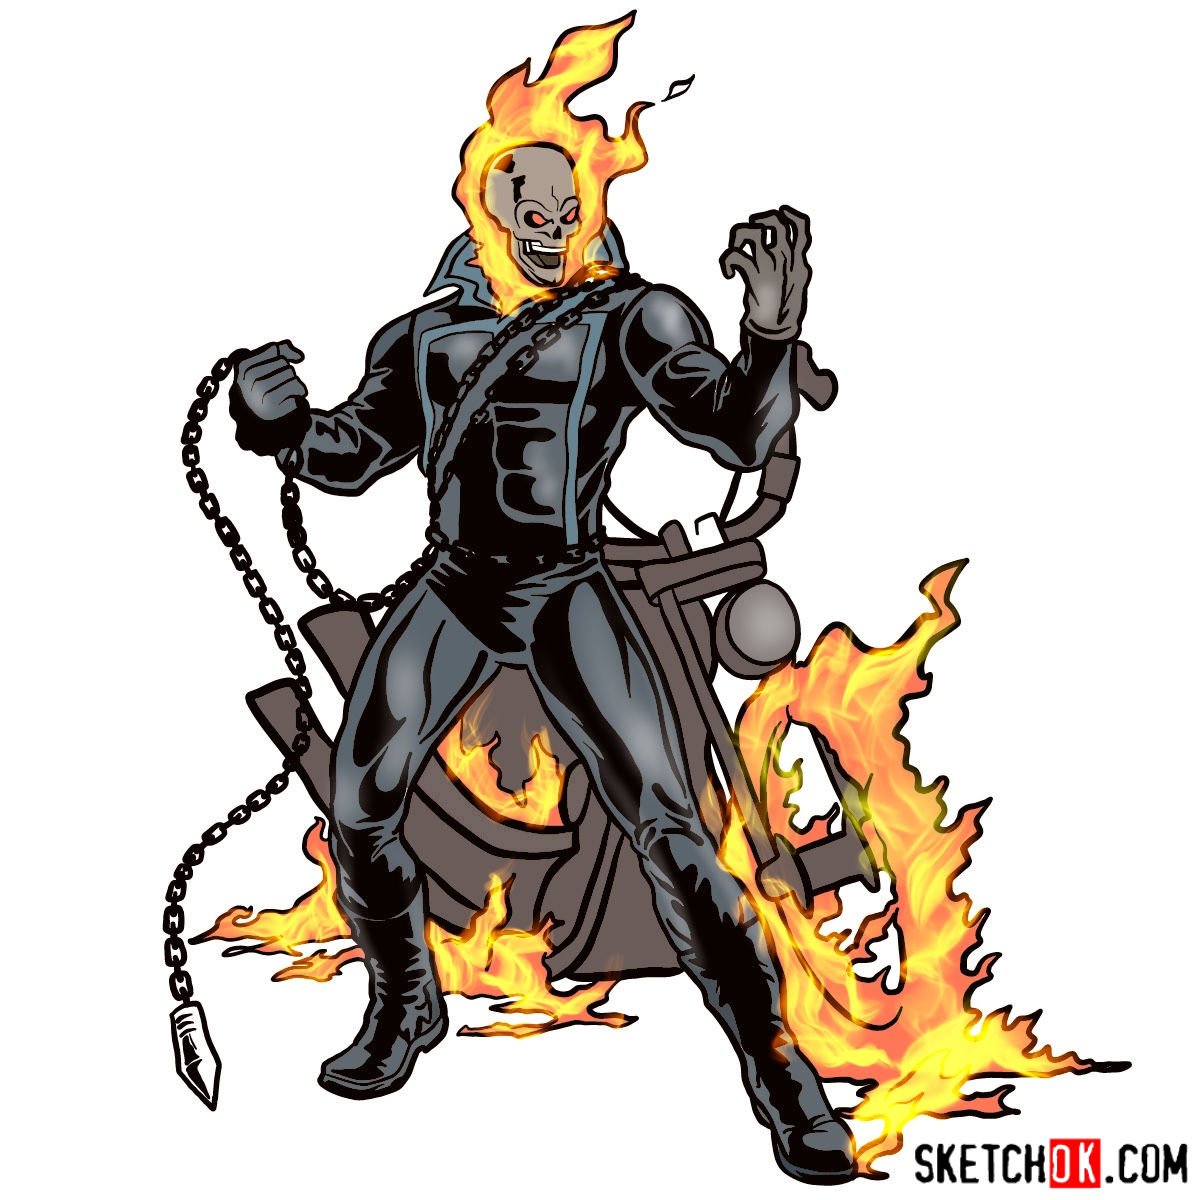 How to draw Ghost Rider with his flaming bike